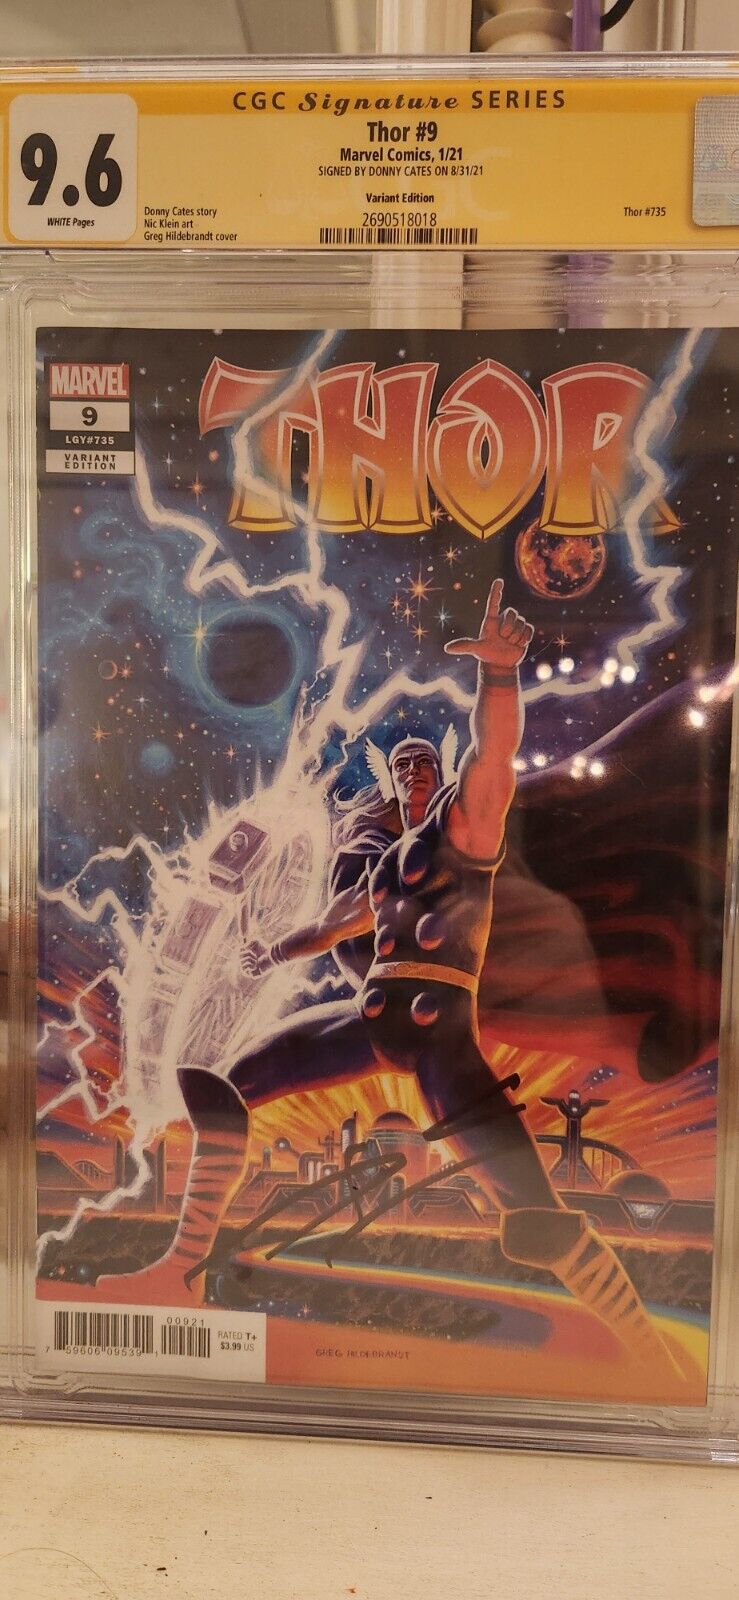 Thor #9 (735) 2021 CGC SS Marvel Signed By Donny Cates CGC 9.6 Signature Series